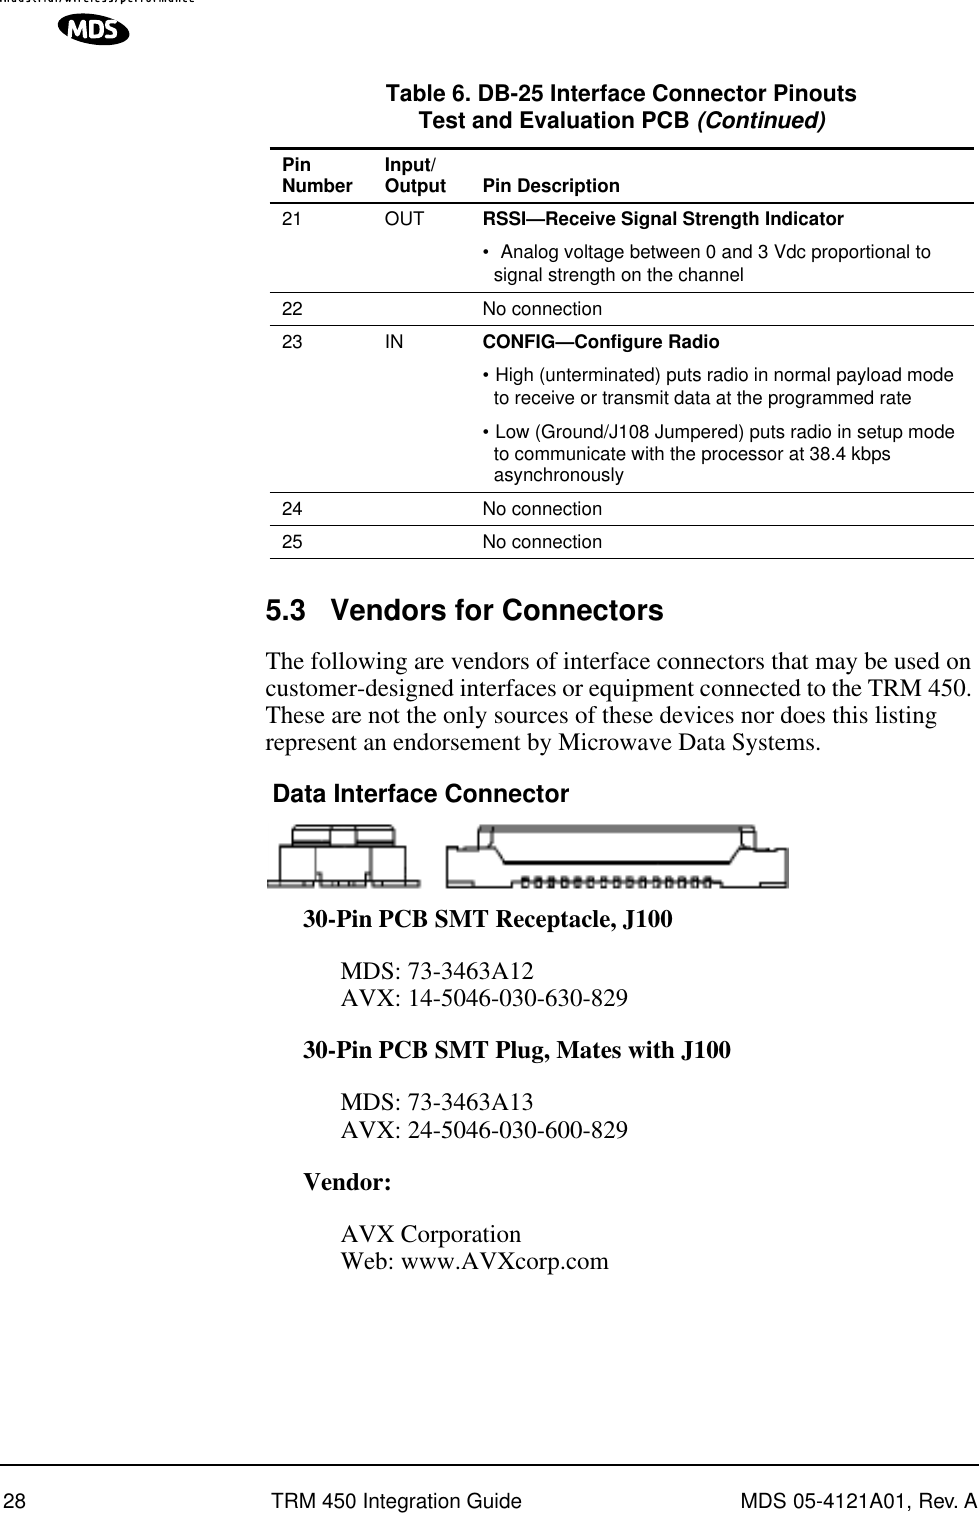 28 TRM 450 Integration Guide MDS 05-4121A01, Rev. A5.3 Vendors for ConnectorsThe following are vendors of interface connectors that may be used on customer-designed interfaces or equipment connected to the TRM 450. These are not the only sources of these devices nor does this listing represent an endorsement by Microwave Data Systems. Data Interface Connector30-Pin PCB SMT Receptacle, J100MDS: 73-3463A12AVX: 14-5046-030-630-82930-Pin PCB SMT Plug, Mates with J100MDS: 73-3463A13AVX: 24-5046-030-600-829Vendor:AVX CorporationWeb: www.AVXcorp.com21 OUT RSSI—Receive Signal Strength Indicator •  Analog voltage between 0 and 3 Vdc proportional to signal strength on the channel22 No connection23 IN CONFIG—Configure Radio• High (unterminated) puts radio in normal payload mode to receive or transmit data at the programmed rate• Low (Ground/J108 Jumpered) puts radio in setup mode to communicate with the processor at 38.4 kbps asynchronously24 No connection25 No connectionTable 6. DB-25 Interface Connector PinoutsTest and Evaluation PCB (Continued)PinNumber Input/Output Pin Description